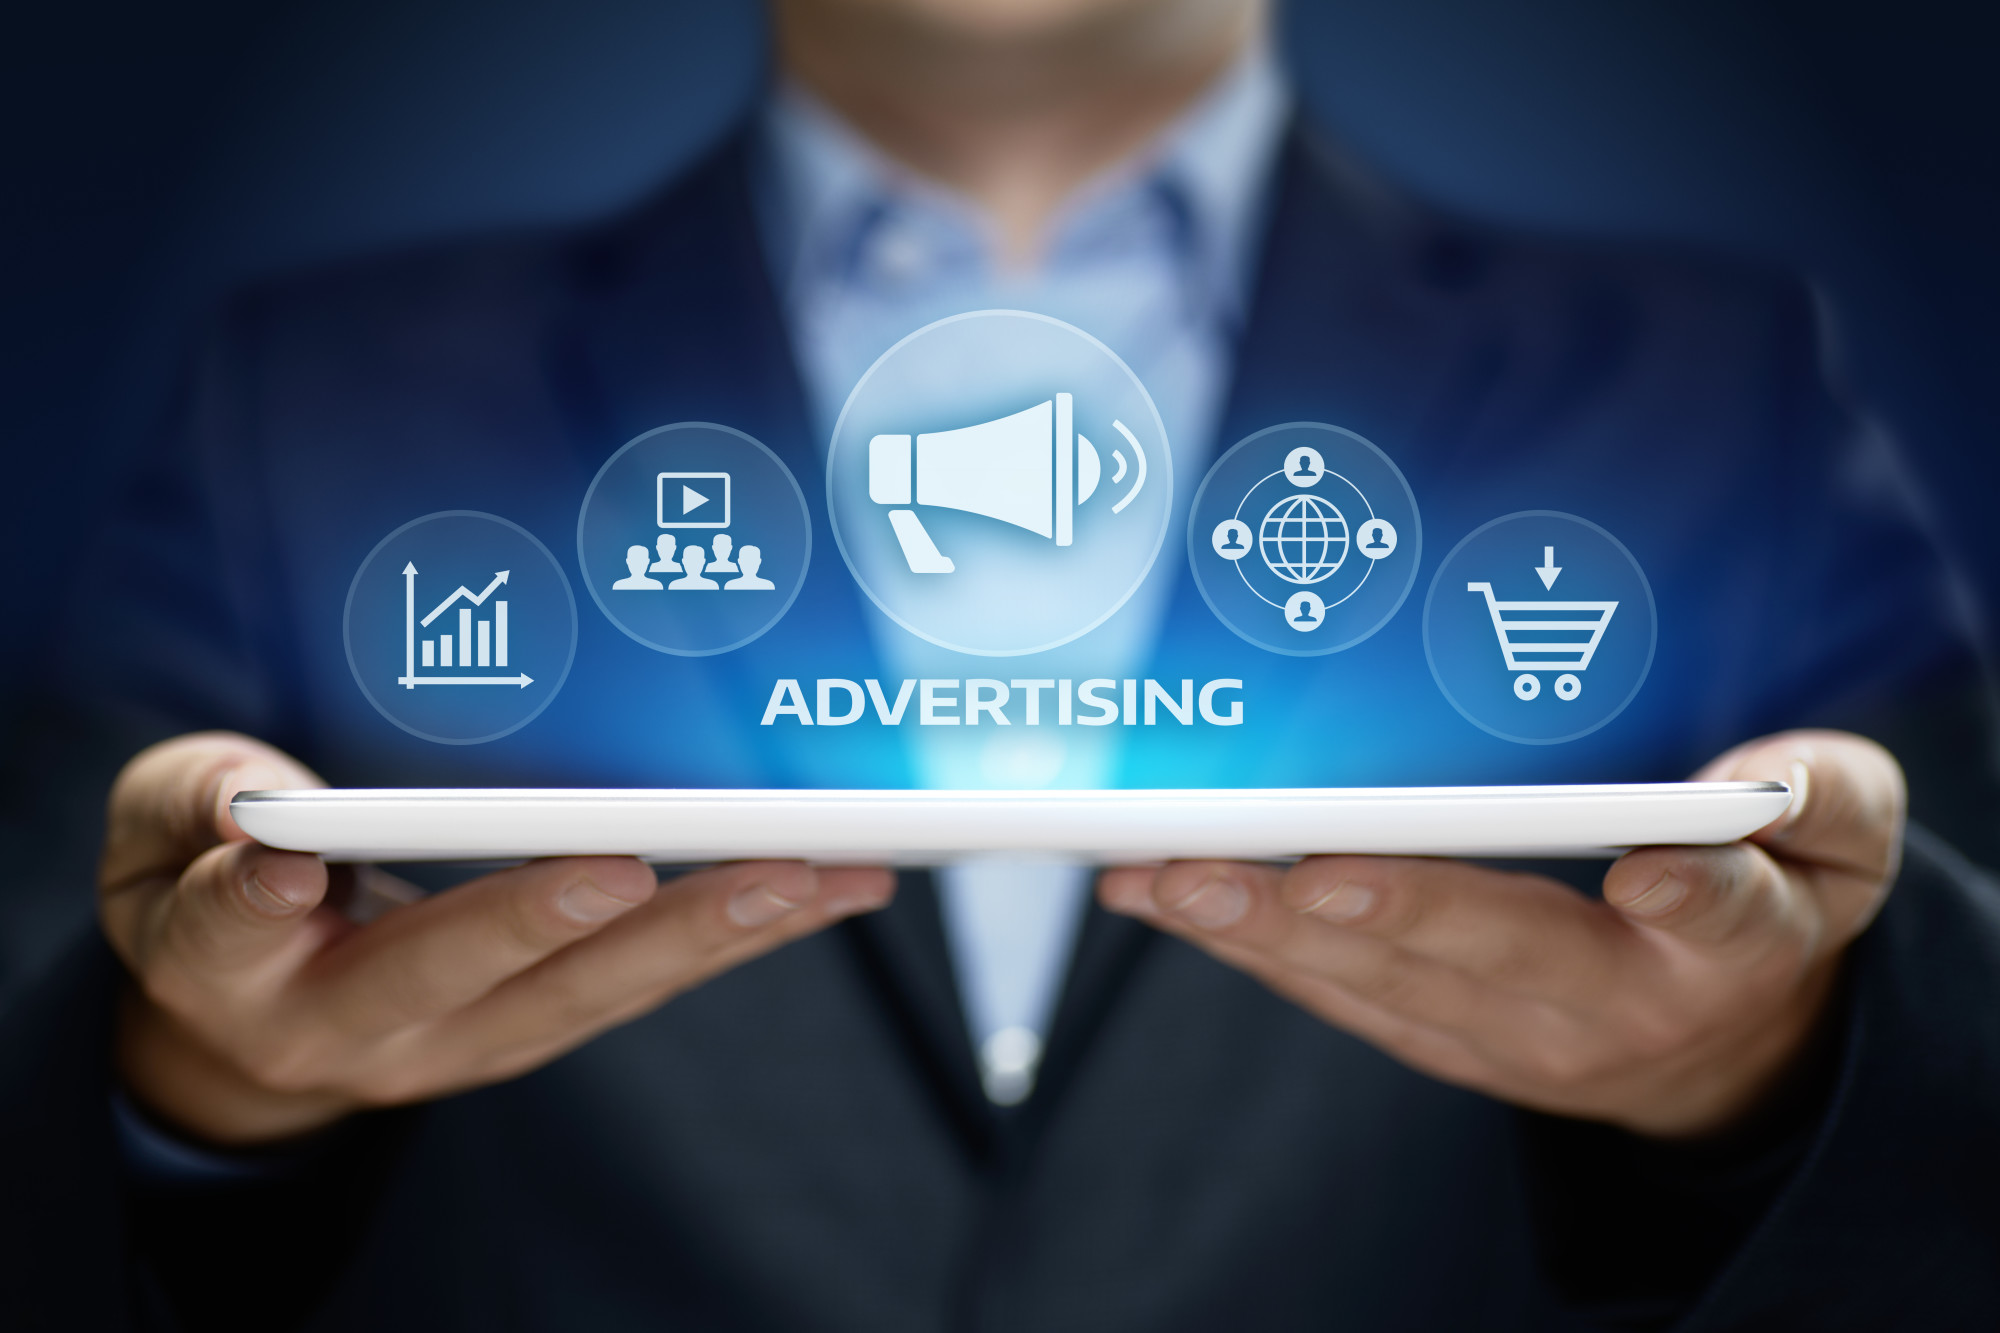 Targeted Advertising Techniques: How Marketers Influence What You See